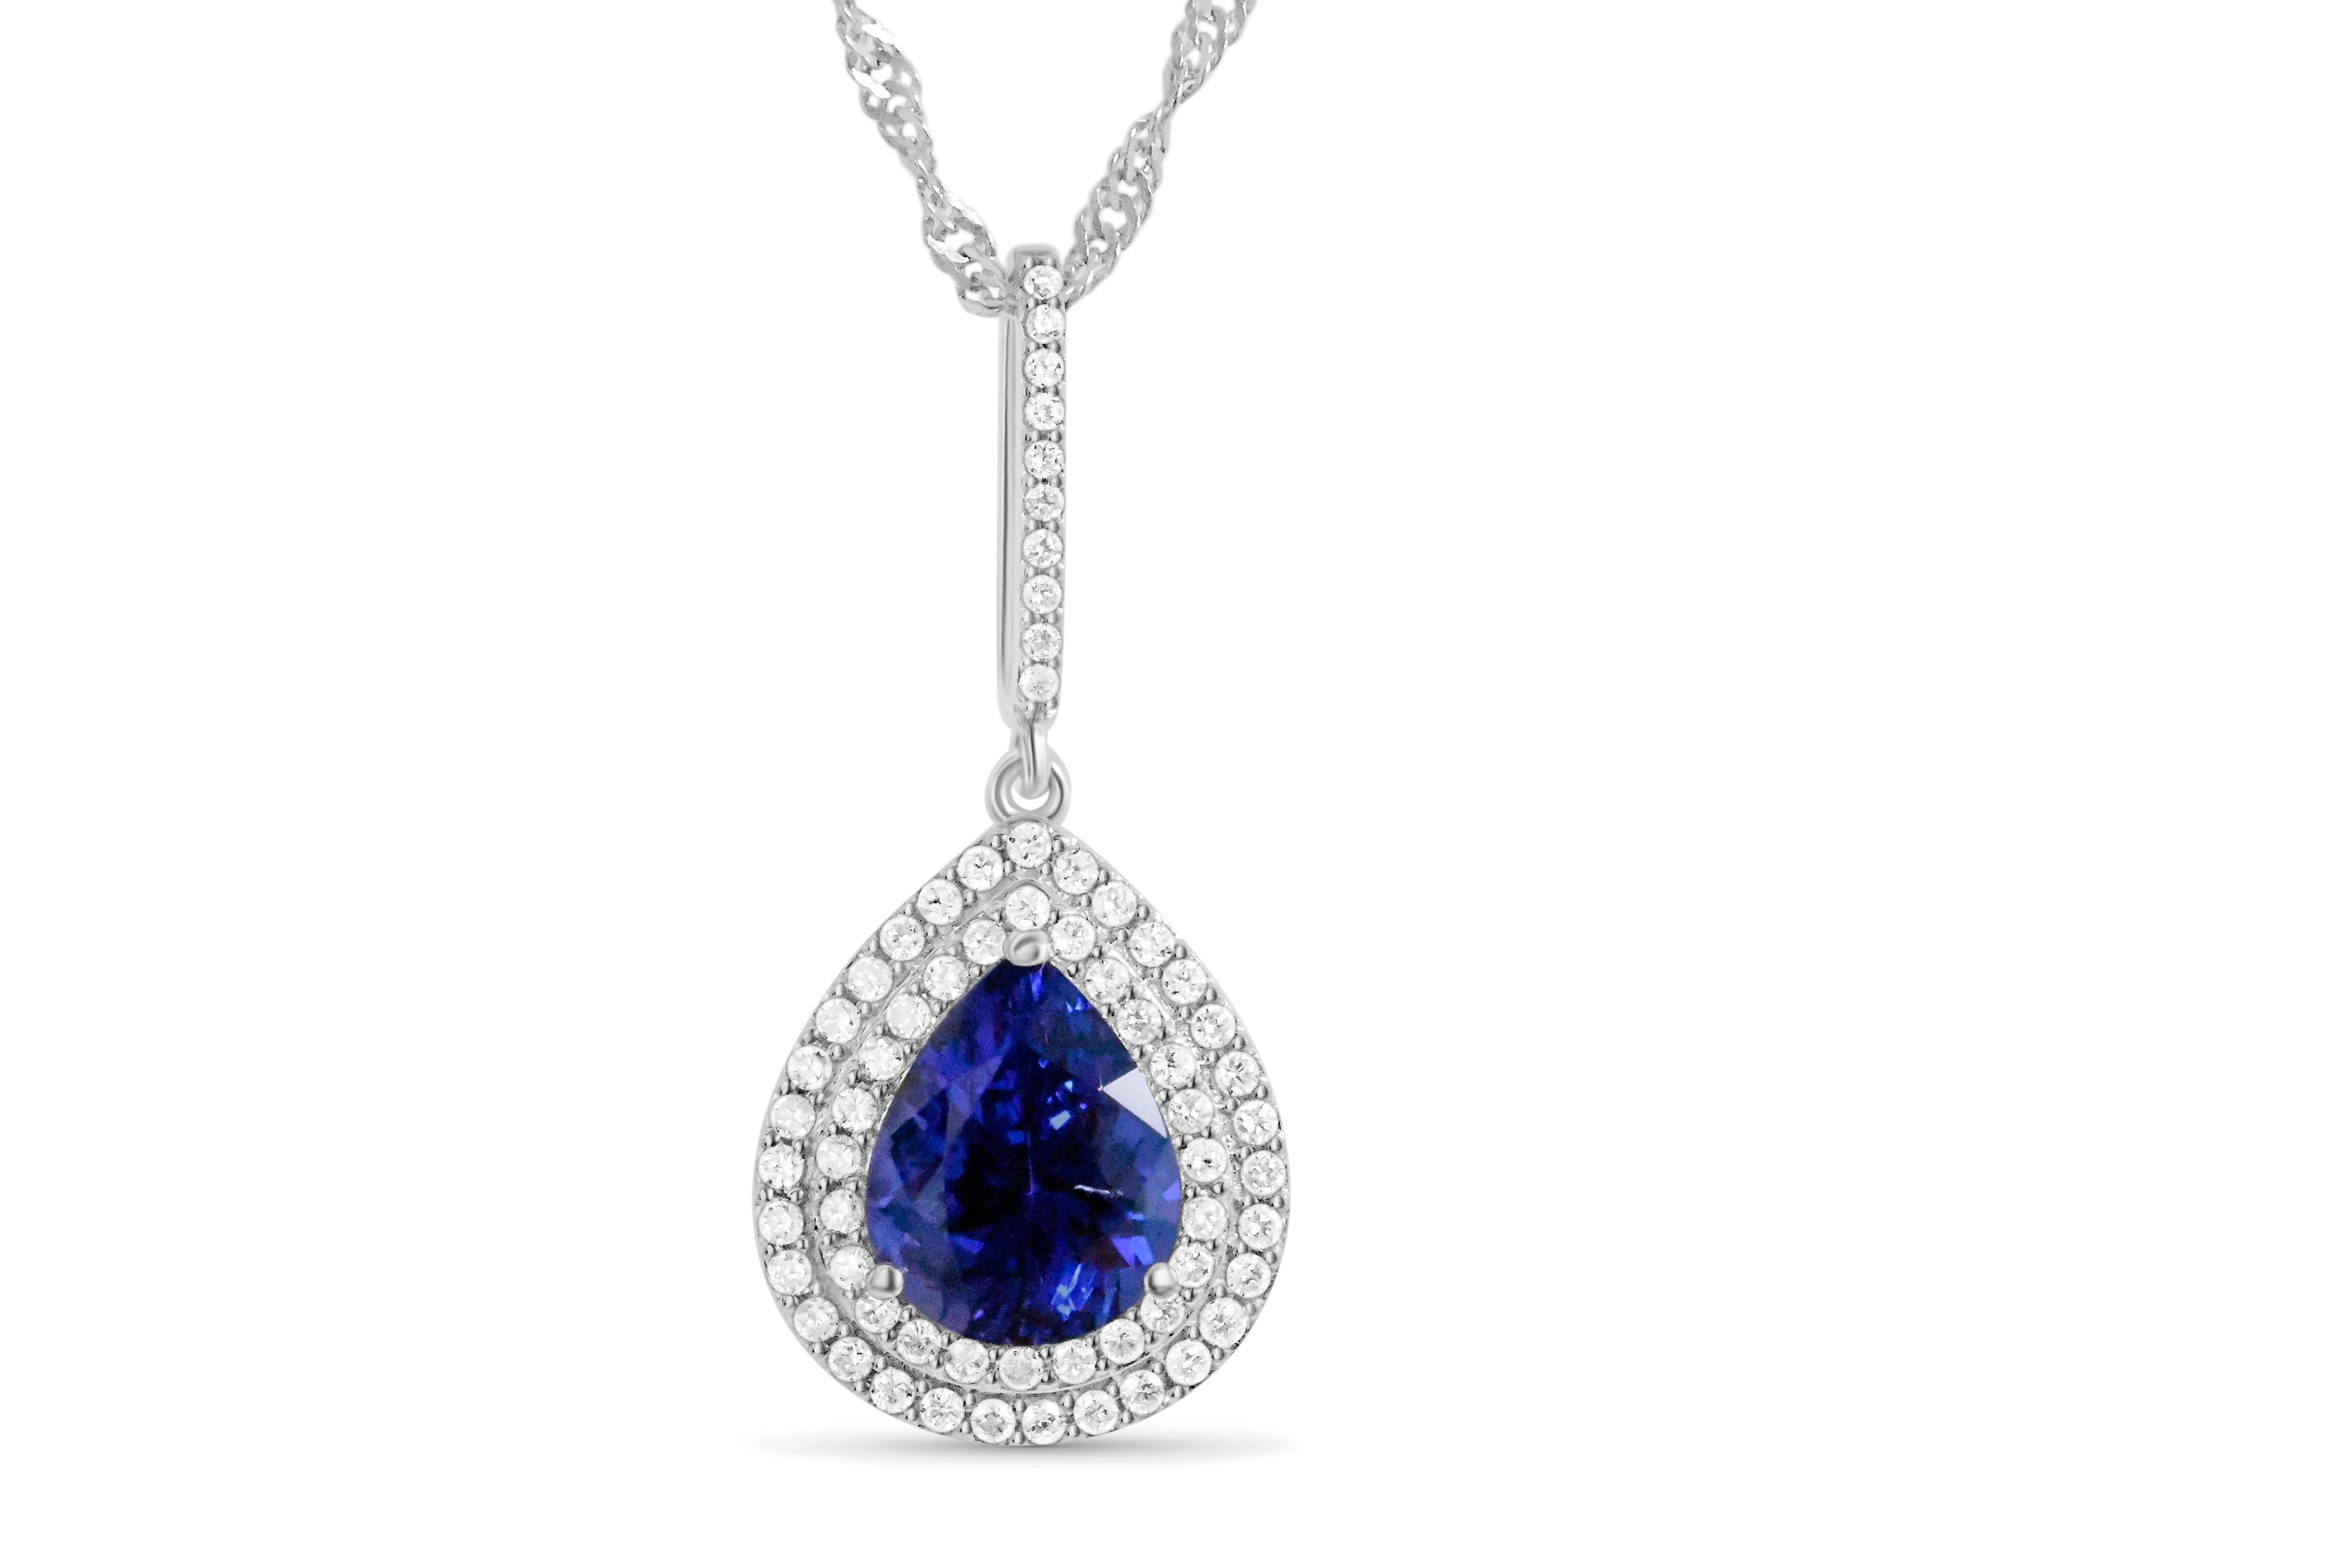 Pear Cut Woman Wedding Tanzanite Pendant Necklace 2.67 cts 14k White Gold . For Sale